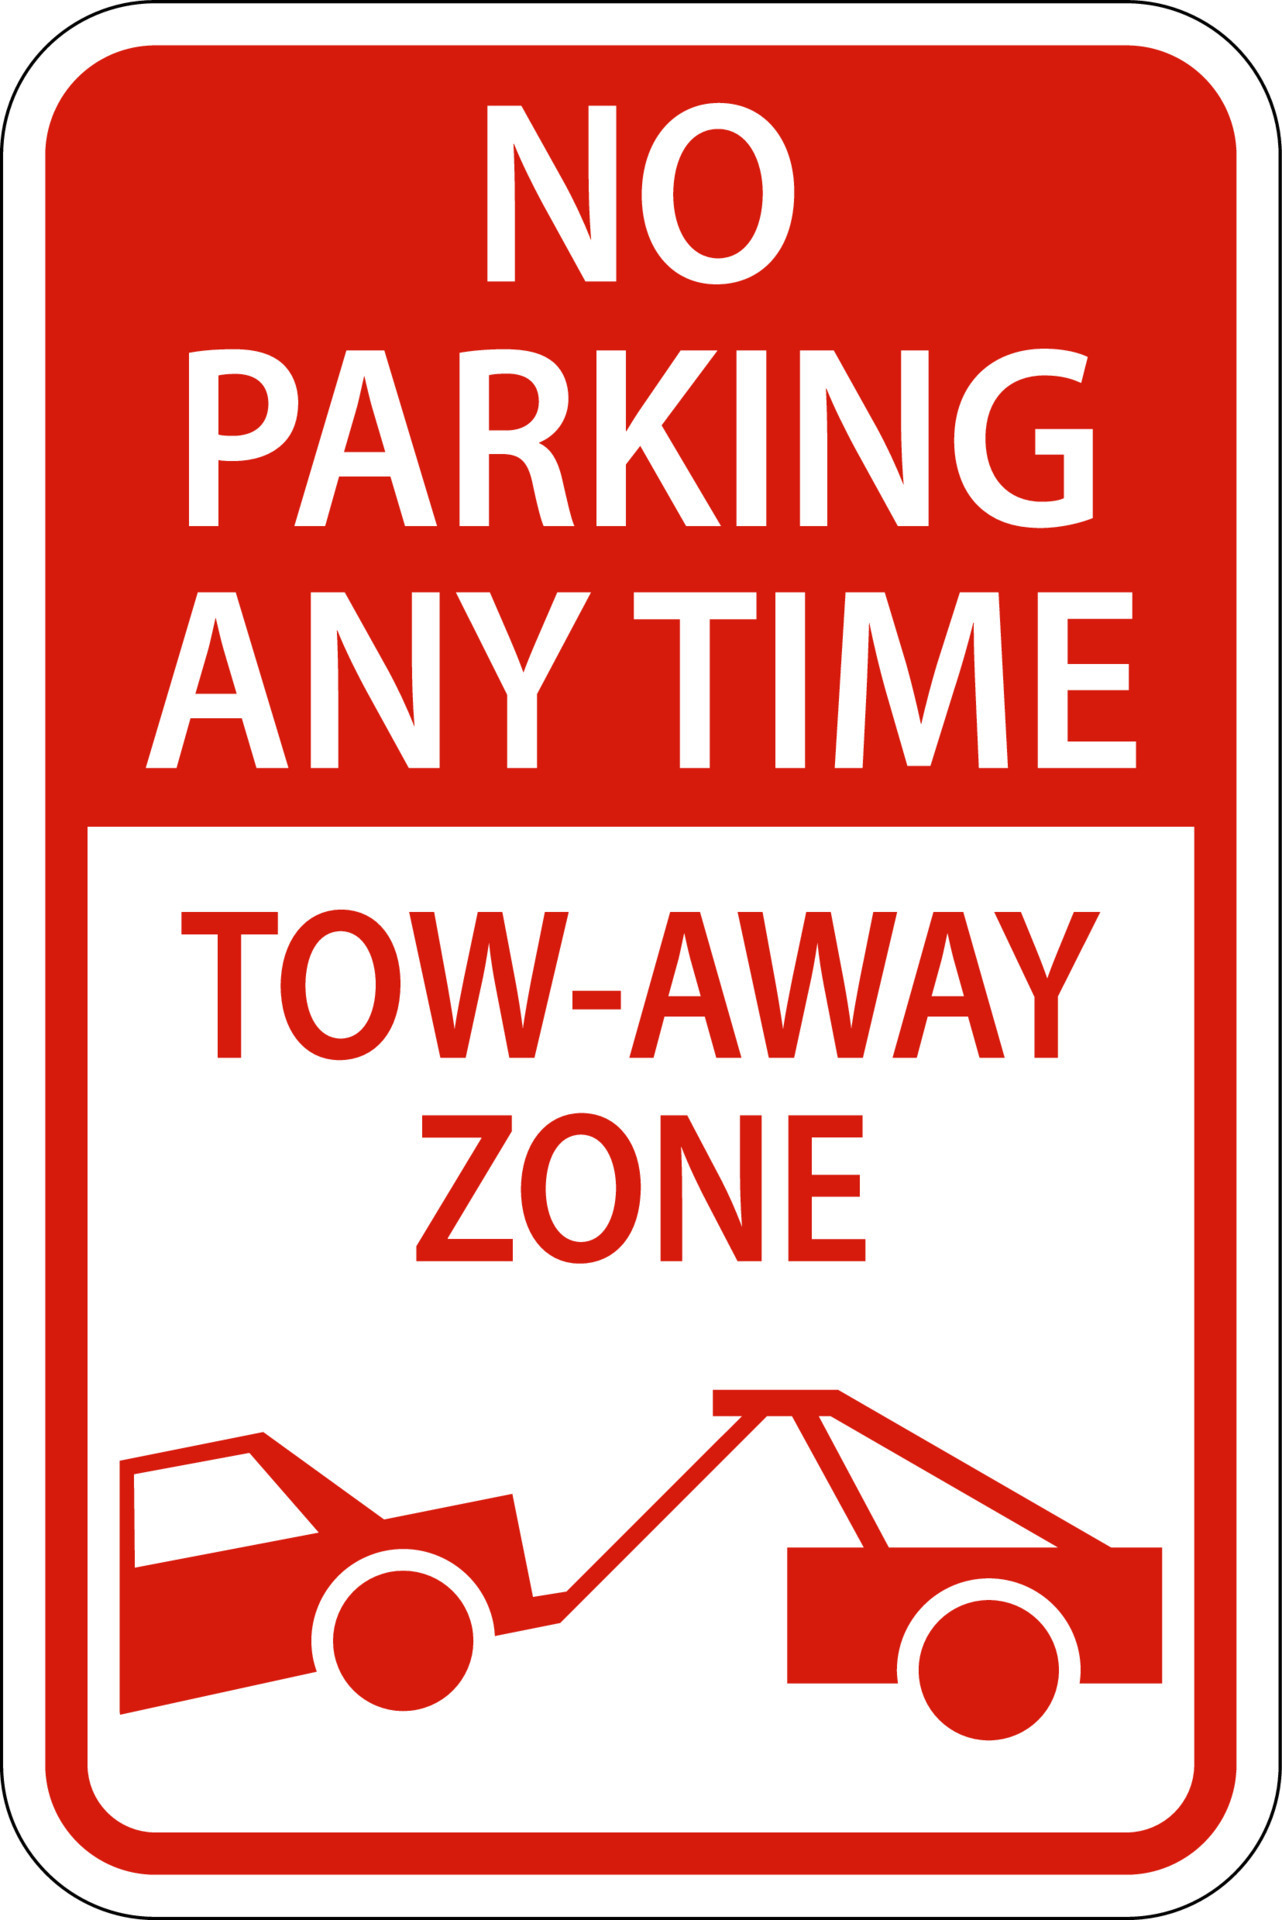 no-parking-any-time-tow-away-zone-sign-on-white-background-7798140